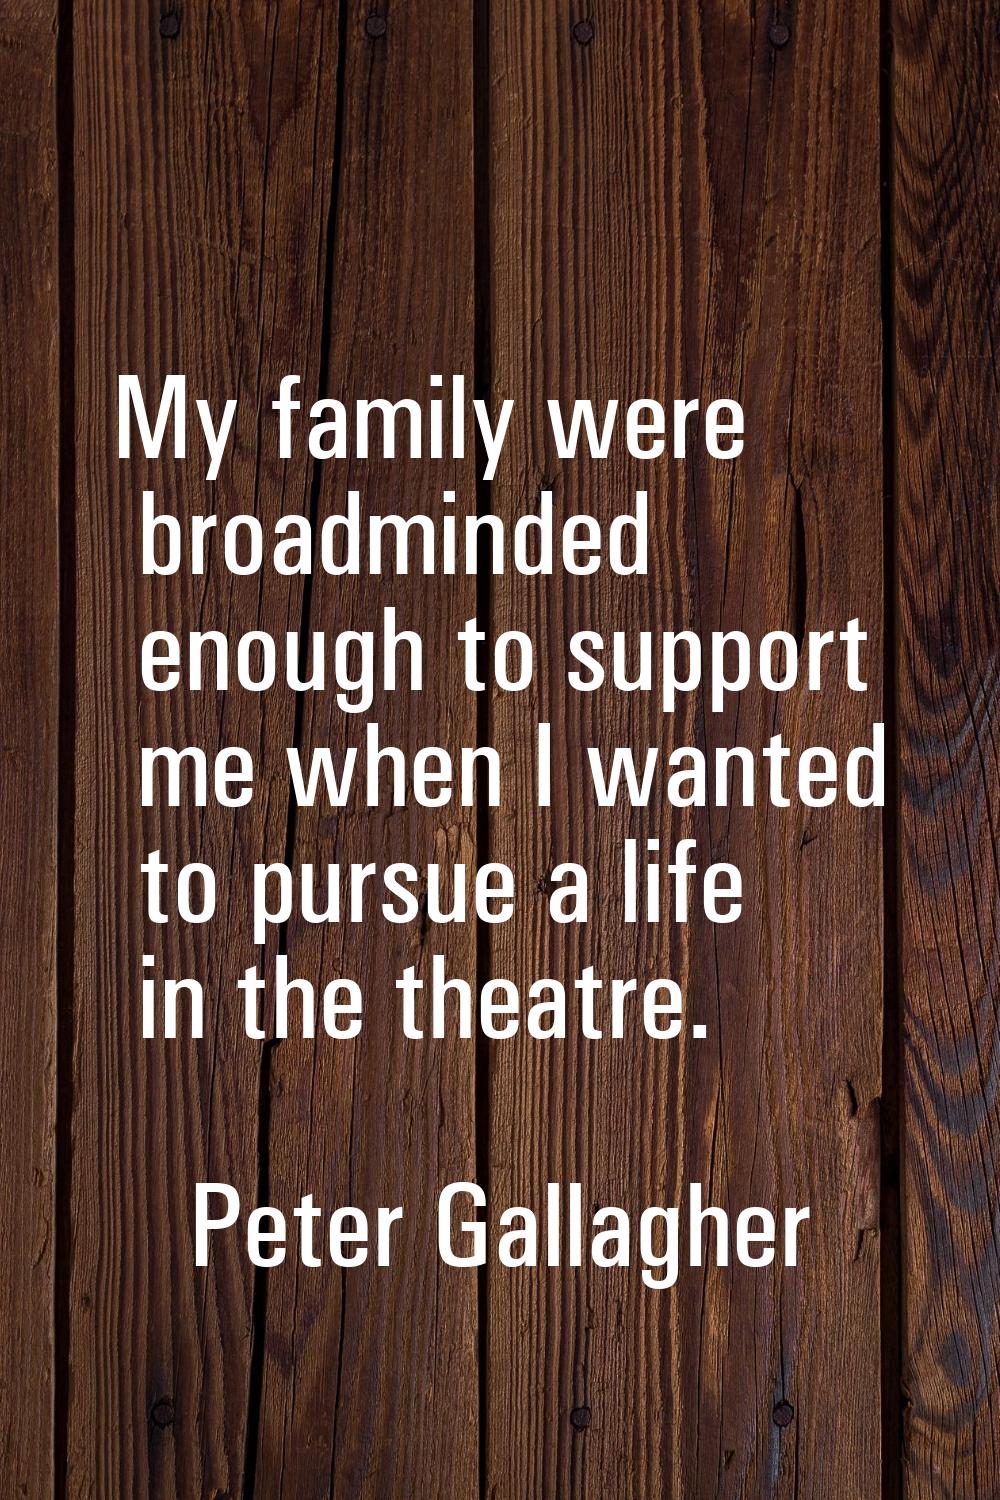 My family were broadminded enough to support me when I wanted to pursue a life in the theatre.